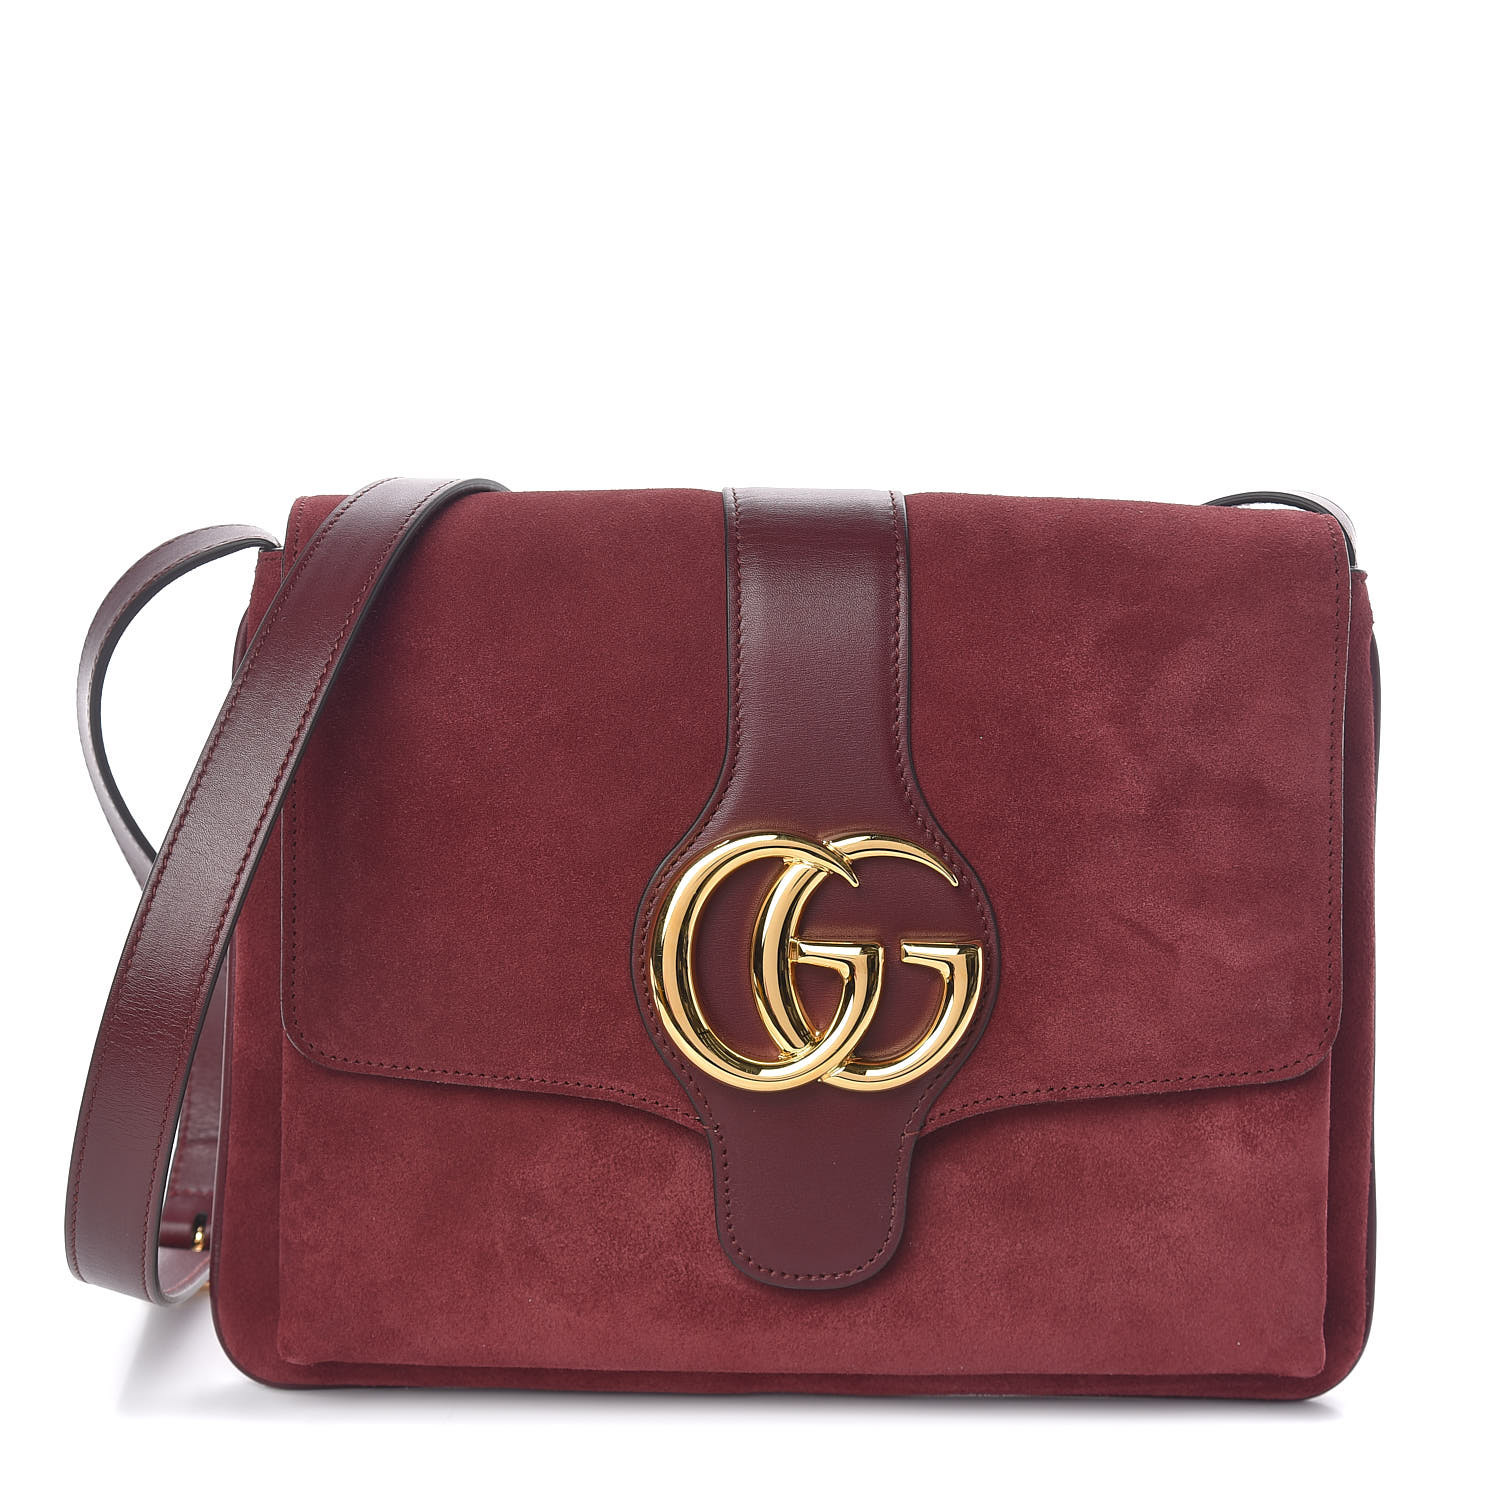 gucci luggage outlet